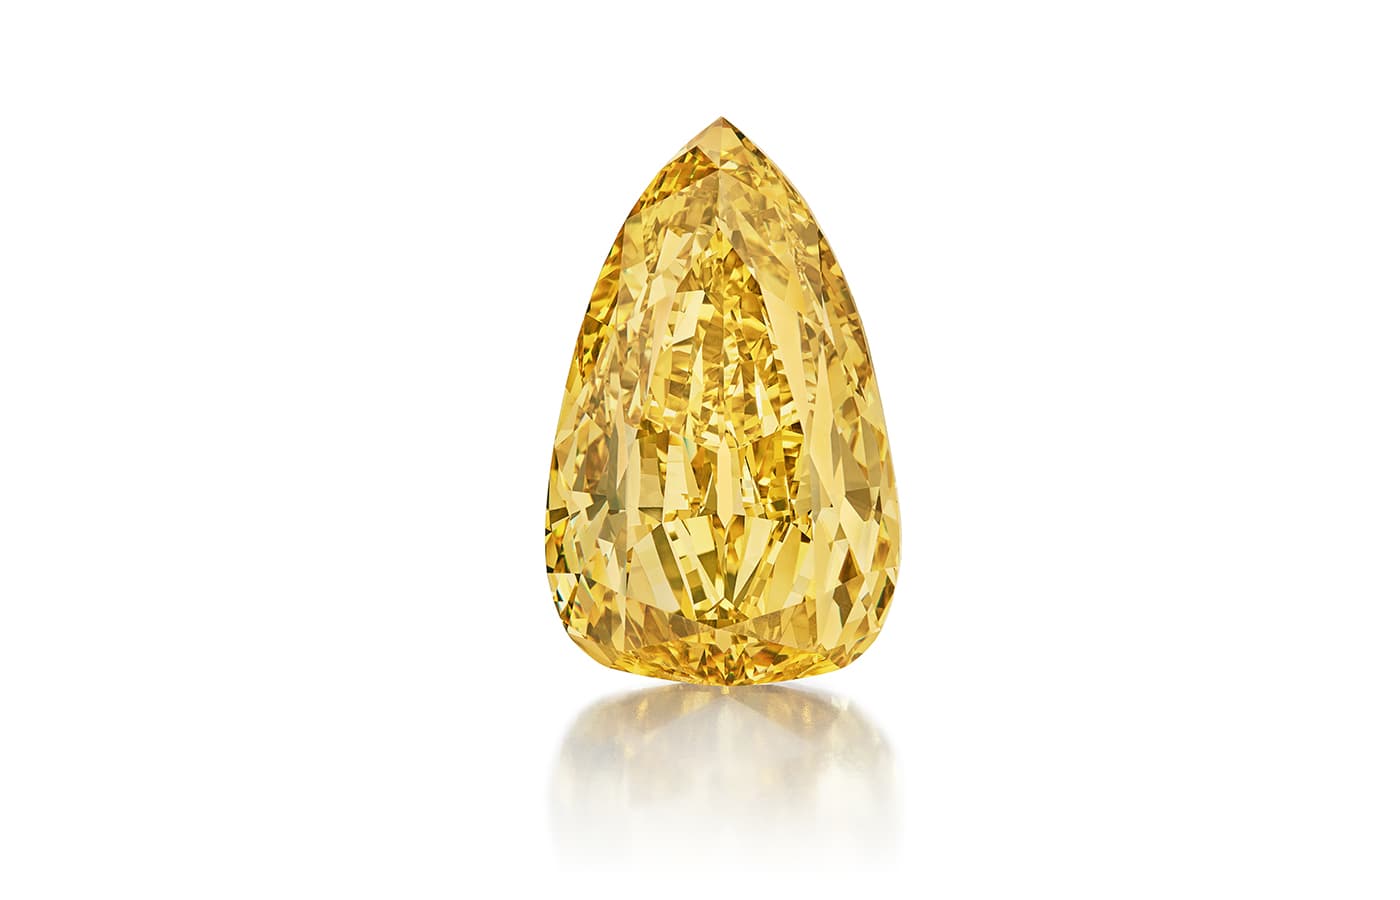 The Golden Canary, a 303.10 carat Fancy Deep Brownish-Yellow Diamond to be auctioned by Sotheby's in New York on Dec 7